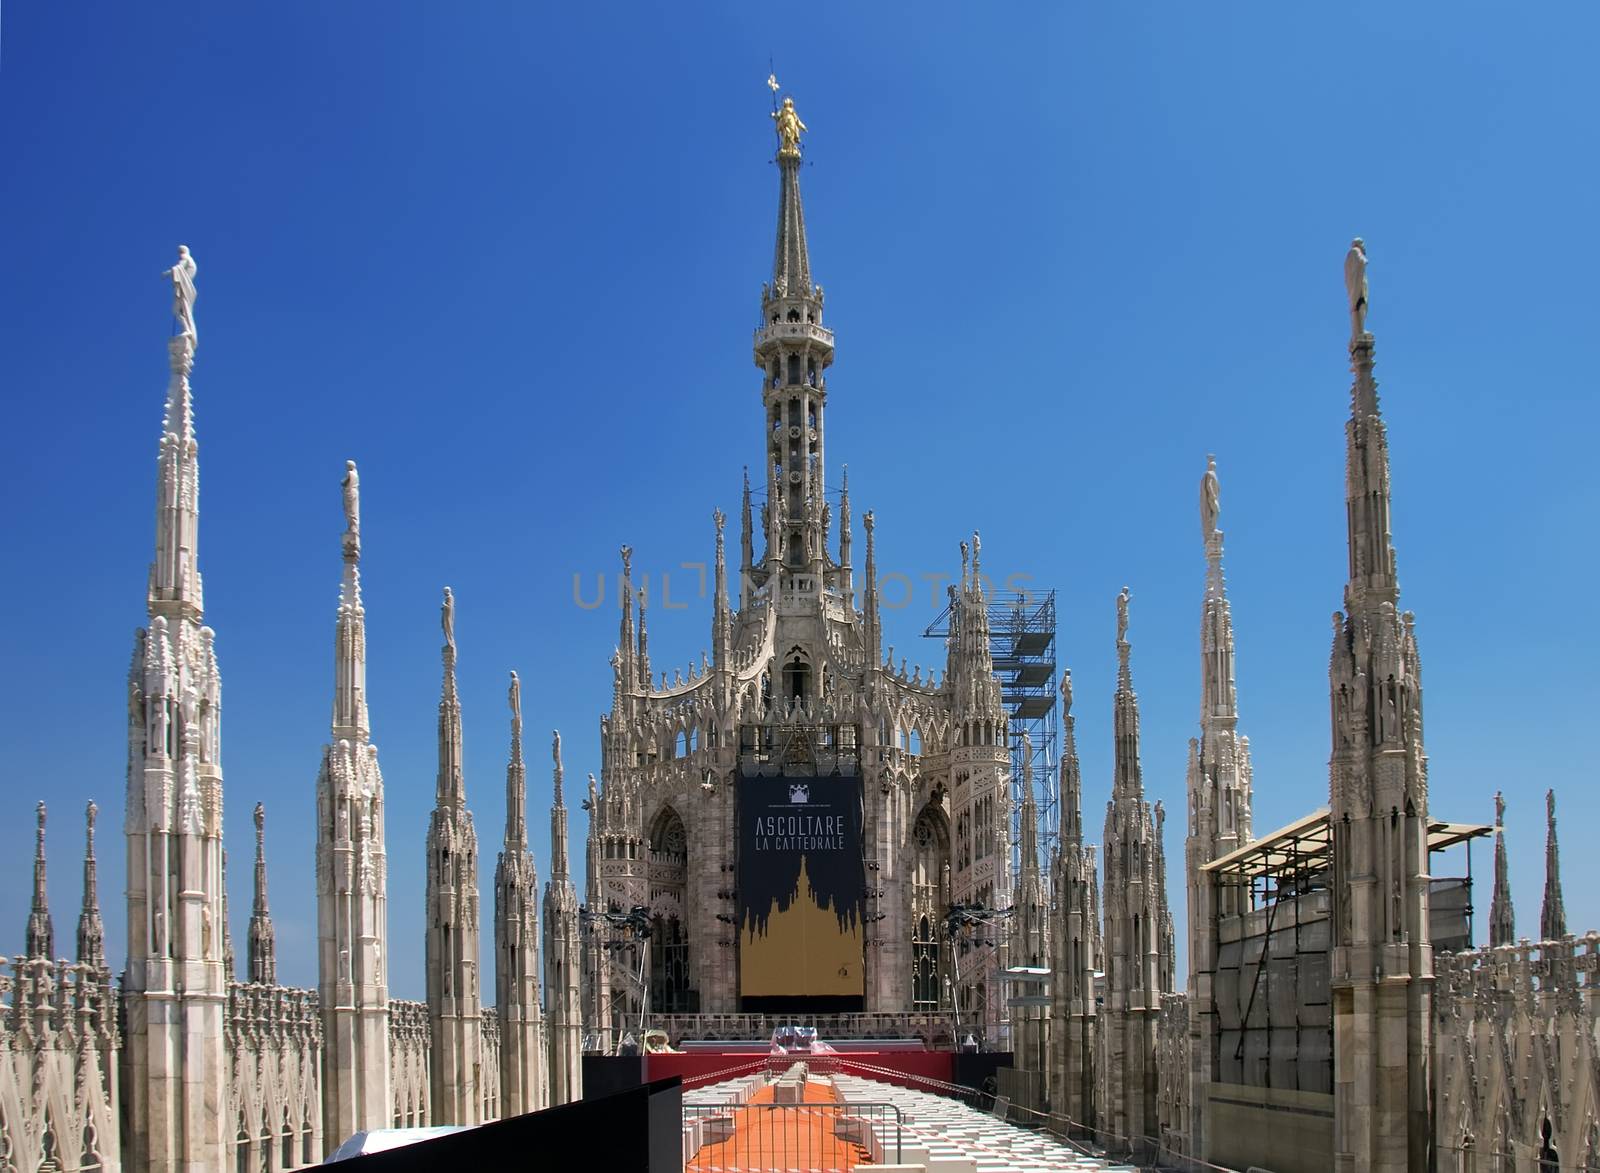 Roof of the cathedral in Milan by fotoecho